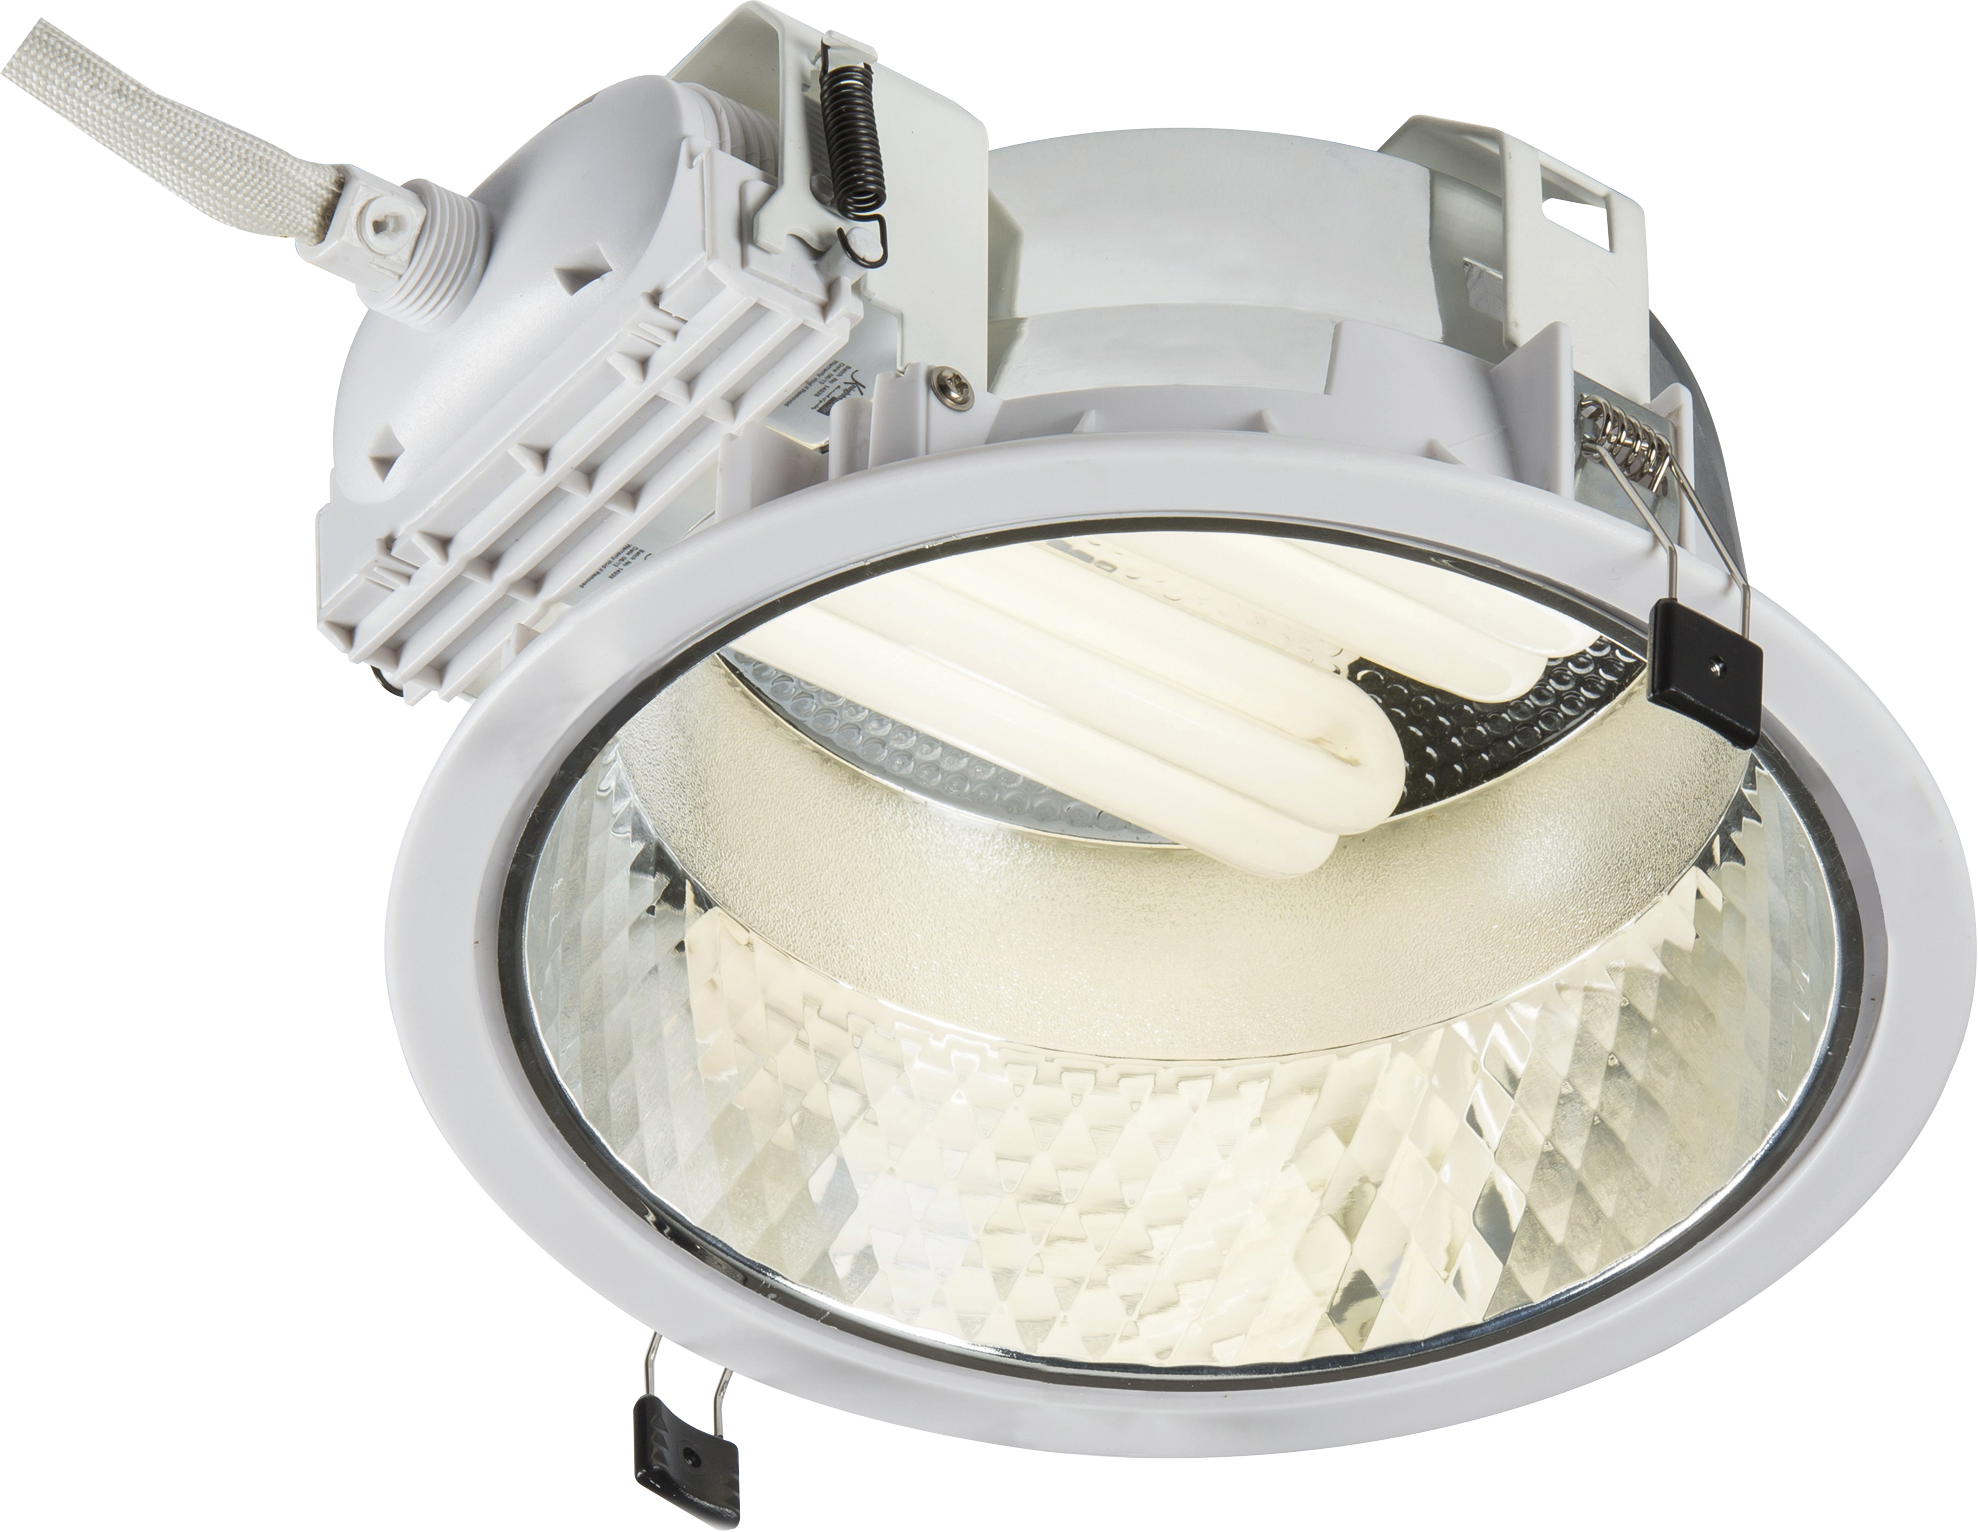 Recessed 230mm Single PL Downlight 1x18W (cut Out 205mm) With Gearbox And Ballast And 200mm Flex - PLD118 